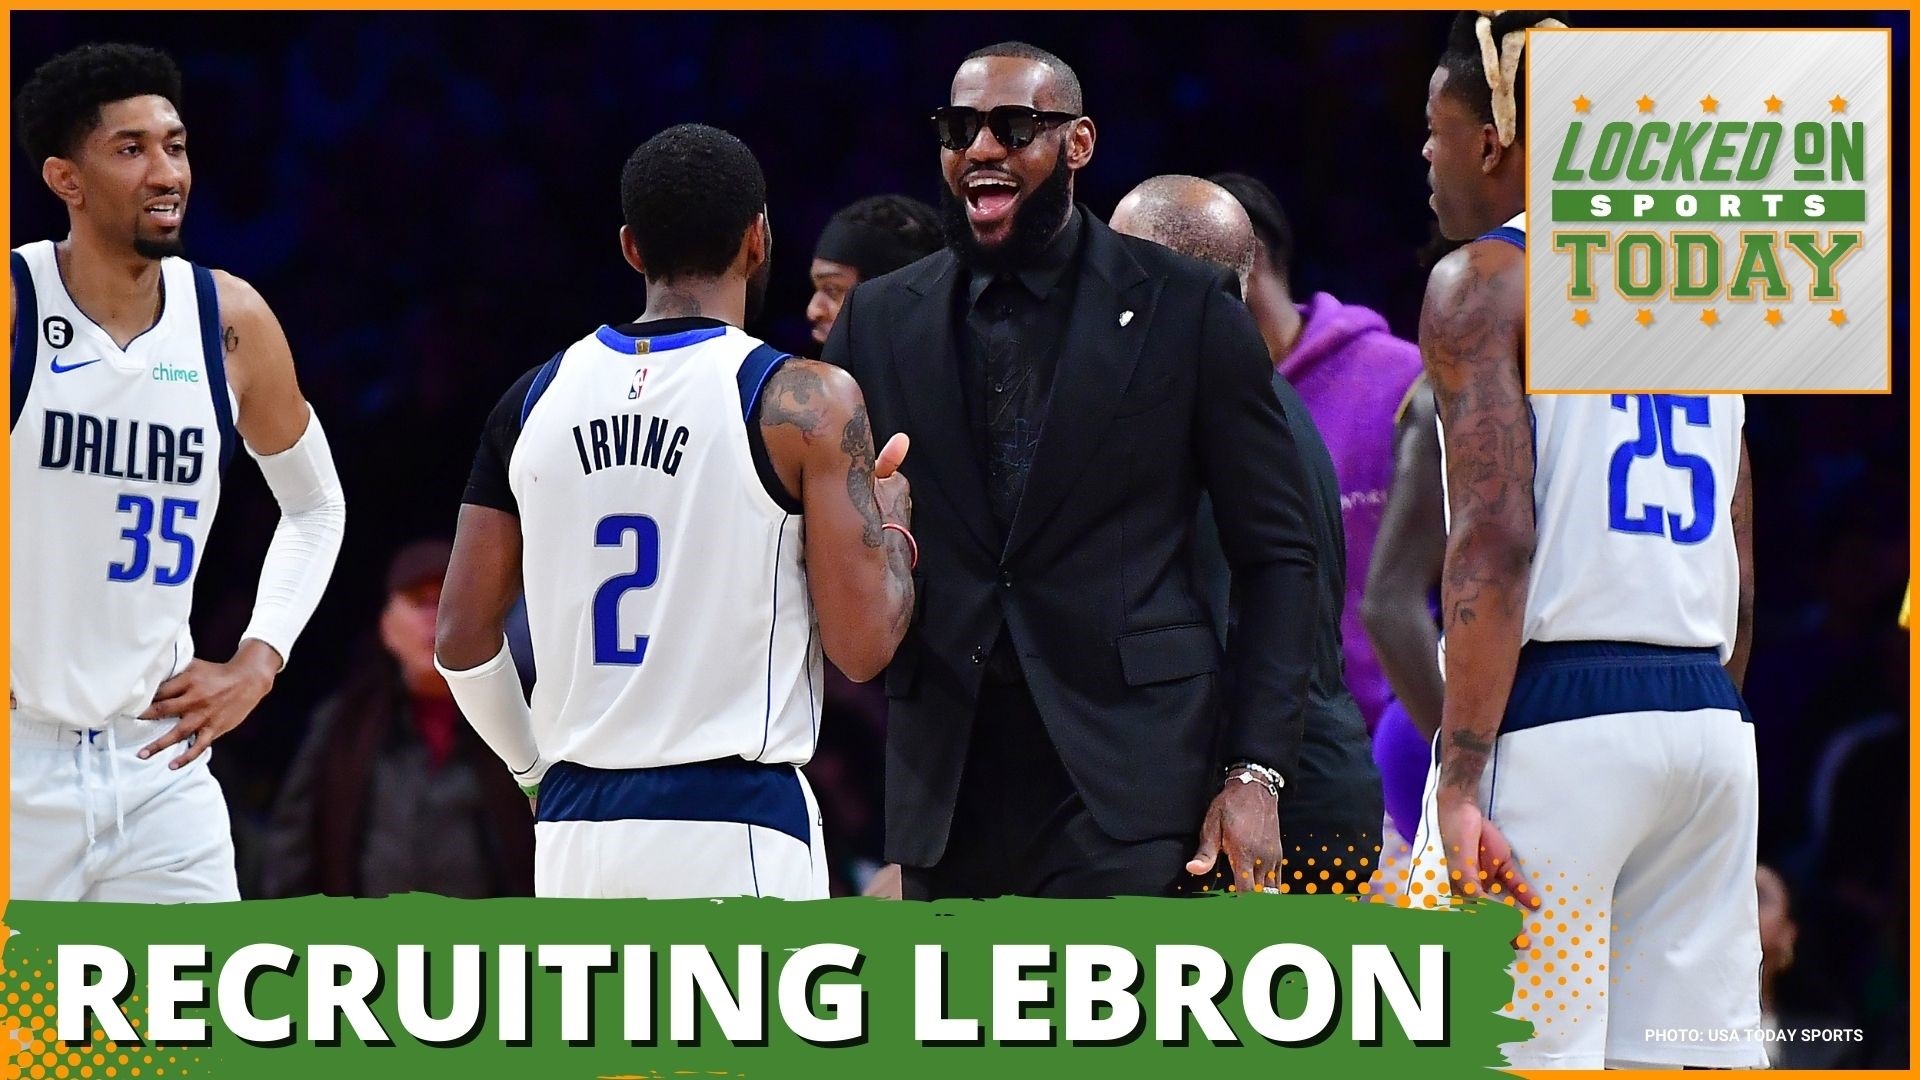 Discussing the day's top sports stories from the chance of Lebron James going to Dallas to the best NBA coaching hire and how A's fans are showing discontent.